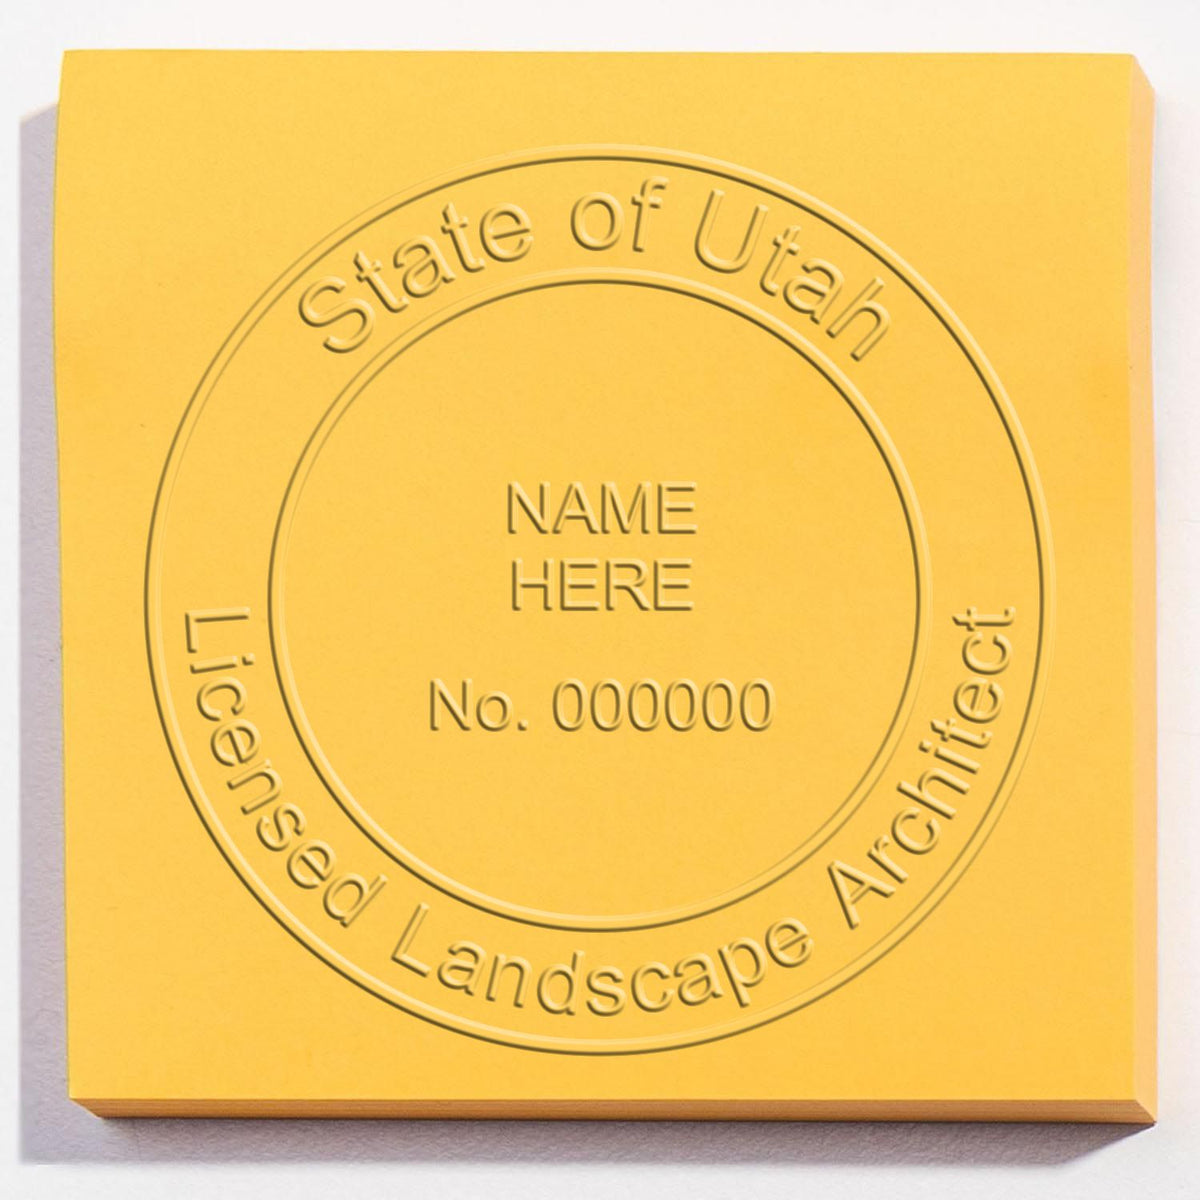 The Gift Utah Landscape Architect Seal stamp impression comes to life with a crisp, detailed image stamped on paper - showcasing true professional quality.